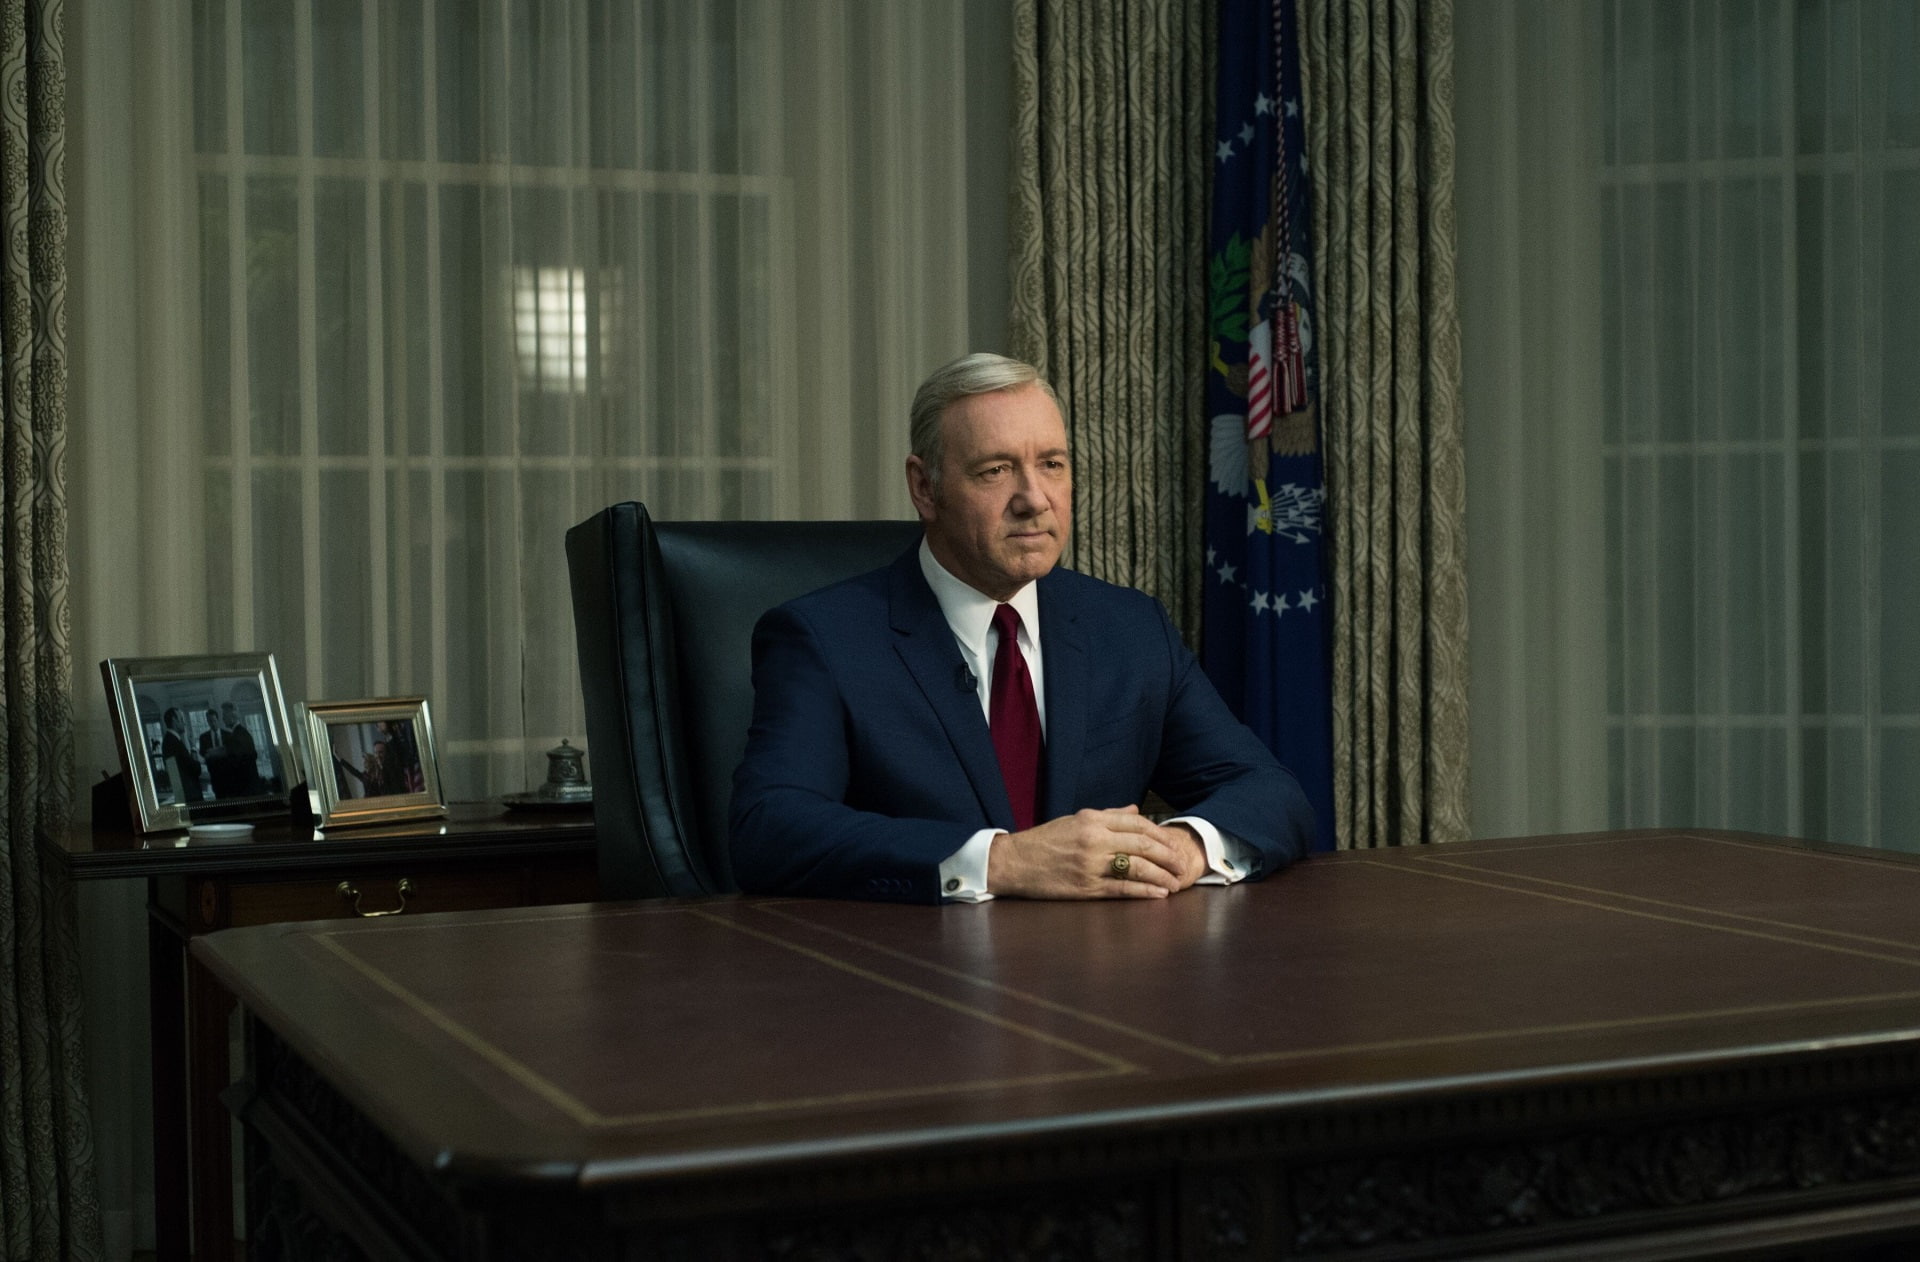 house of cards pictures  for desktop, businessman, business person